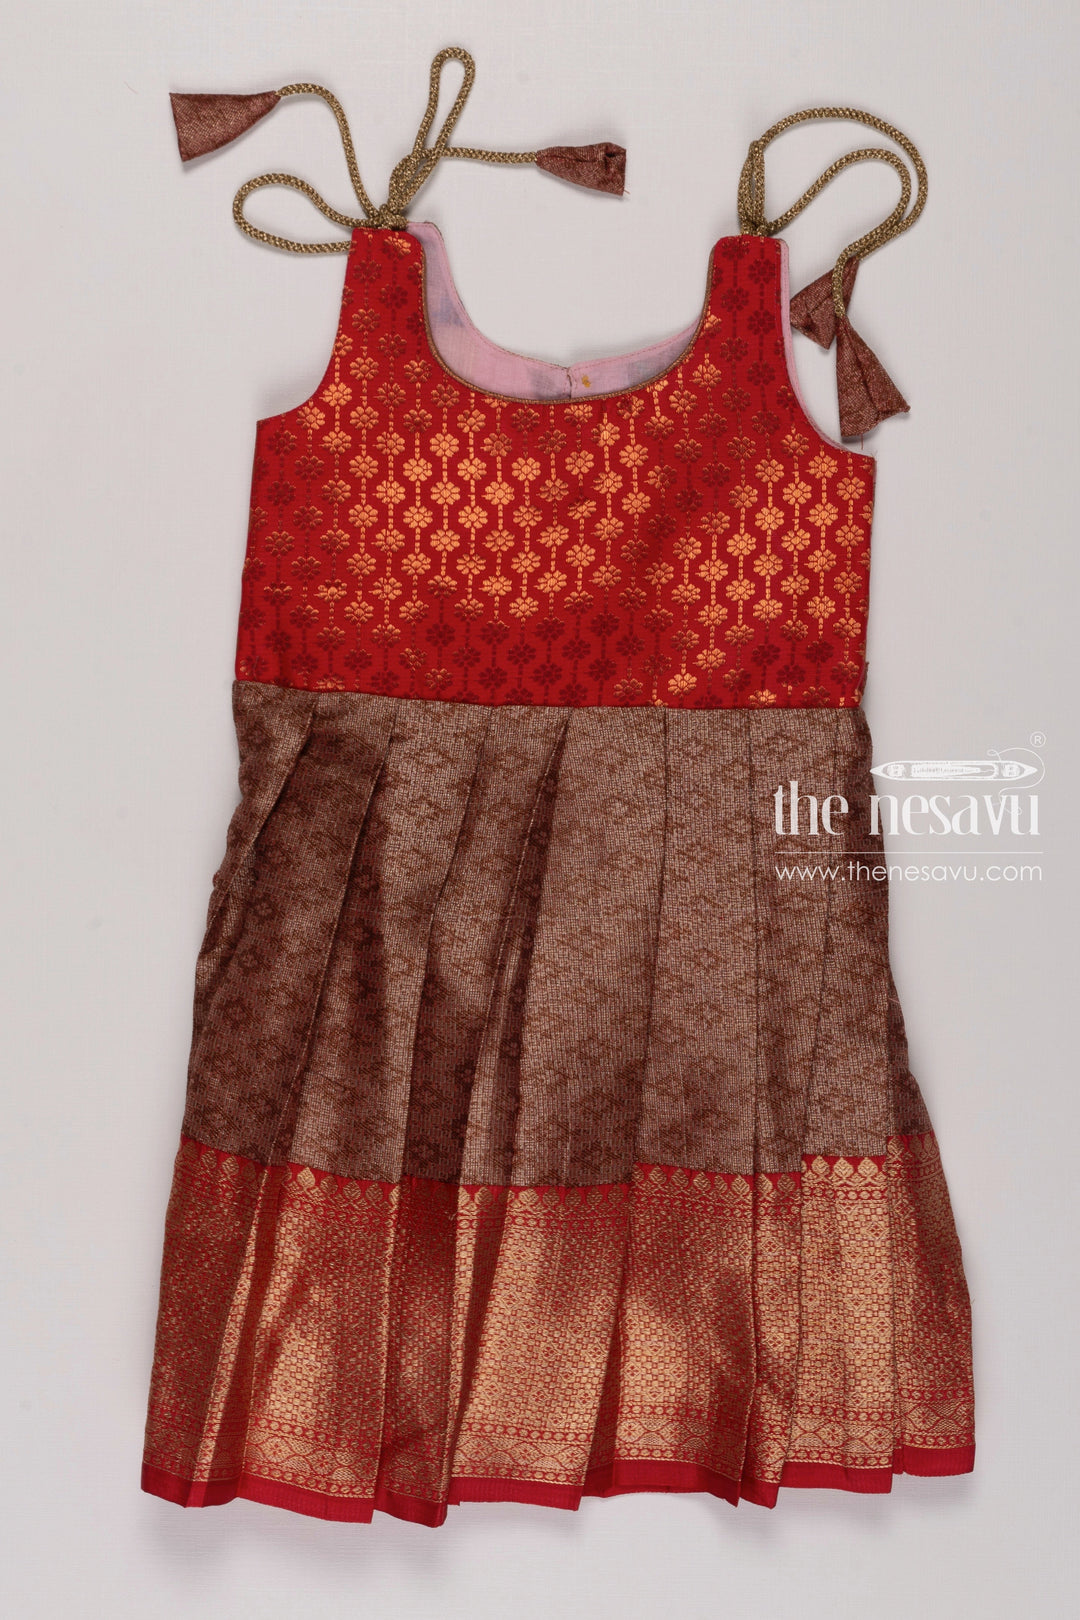 The Nesavu Tie-up Frock Red and Brown Silk TieUp Infant Frock with Gold Detailing Nesavu 16 (1Y) / Brown / Blend Silk T289A-16 Terracotta Garnet Silk Frock | Elegant Party Wear with Gold Accents | The Nesavu